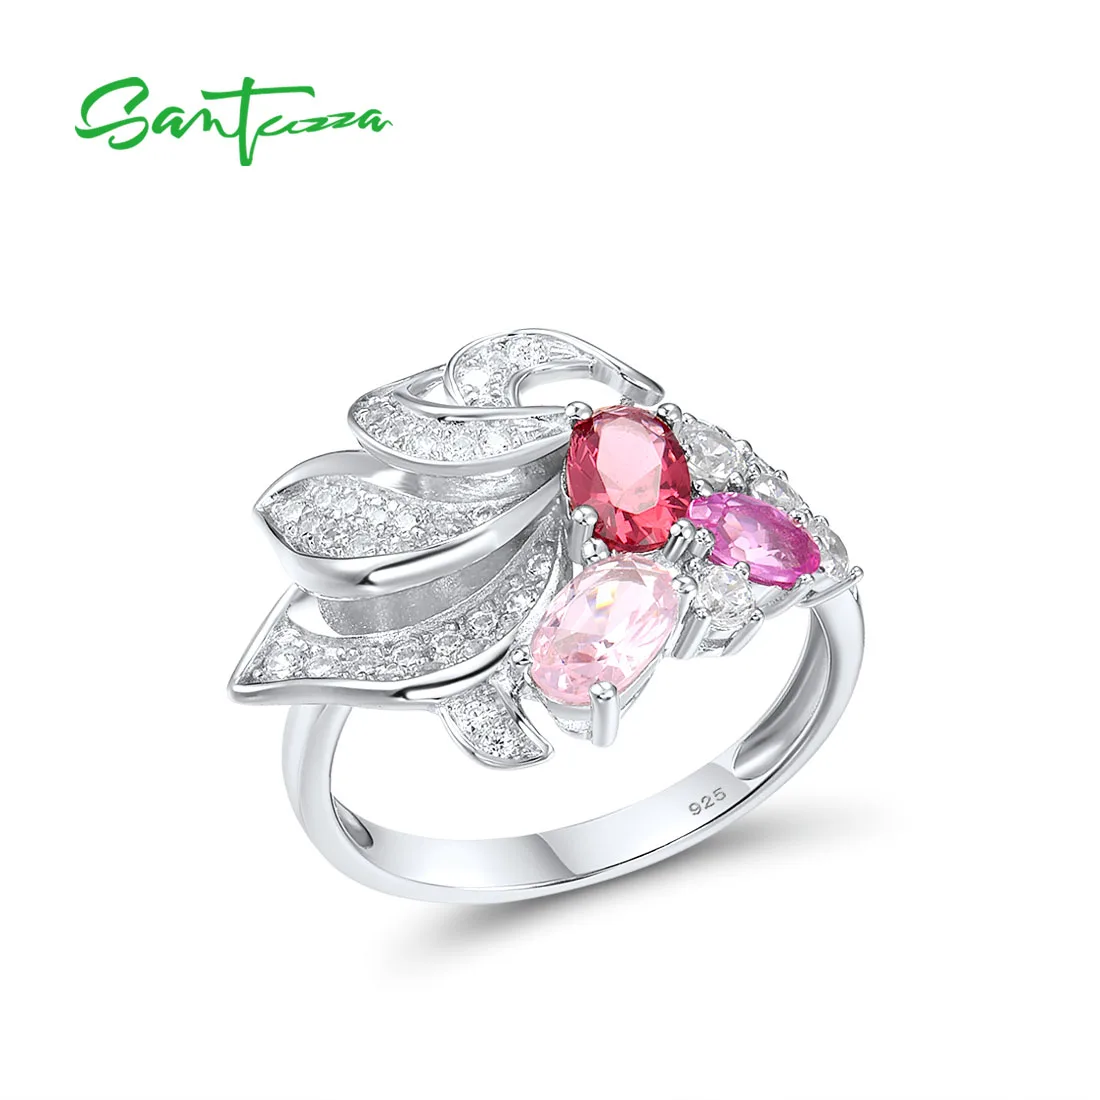 

SANTUZZA Genuine 925 Sterling Silver Rings For Women Sparkling Red Pink Stones White CZ Cluster Ring Elegant Fashion Jewelry